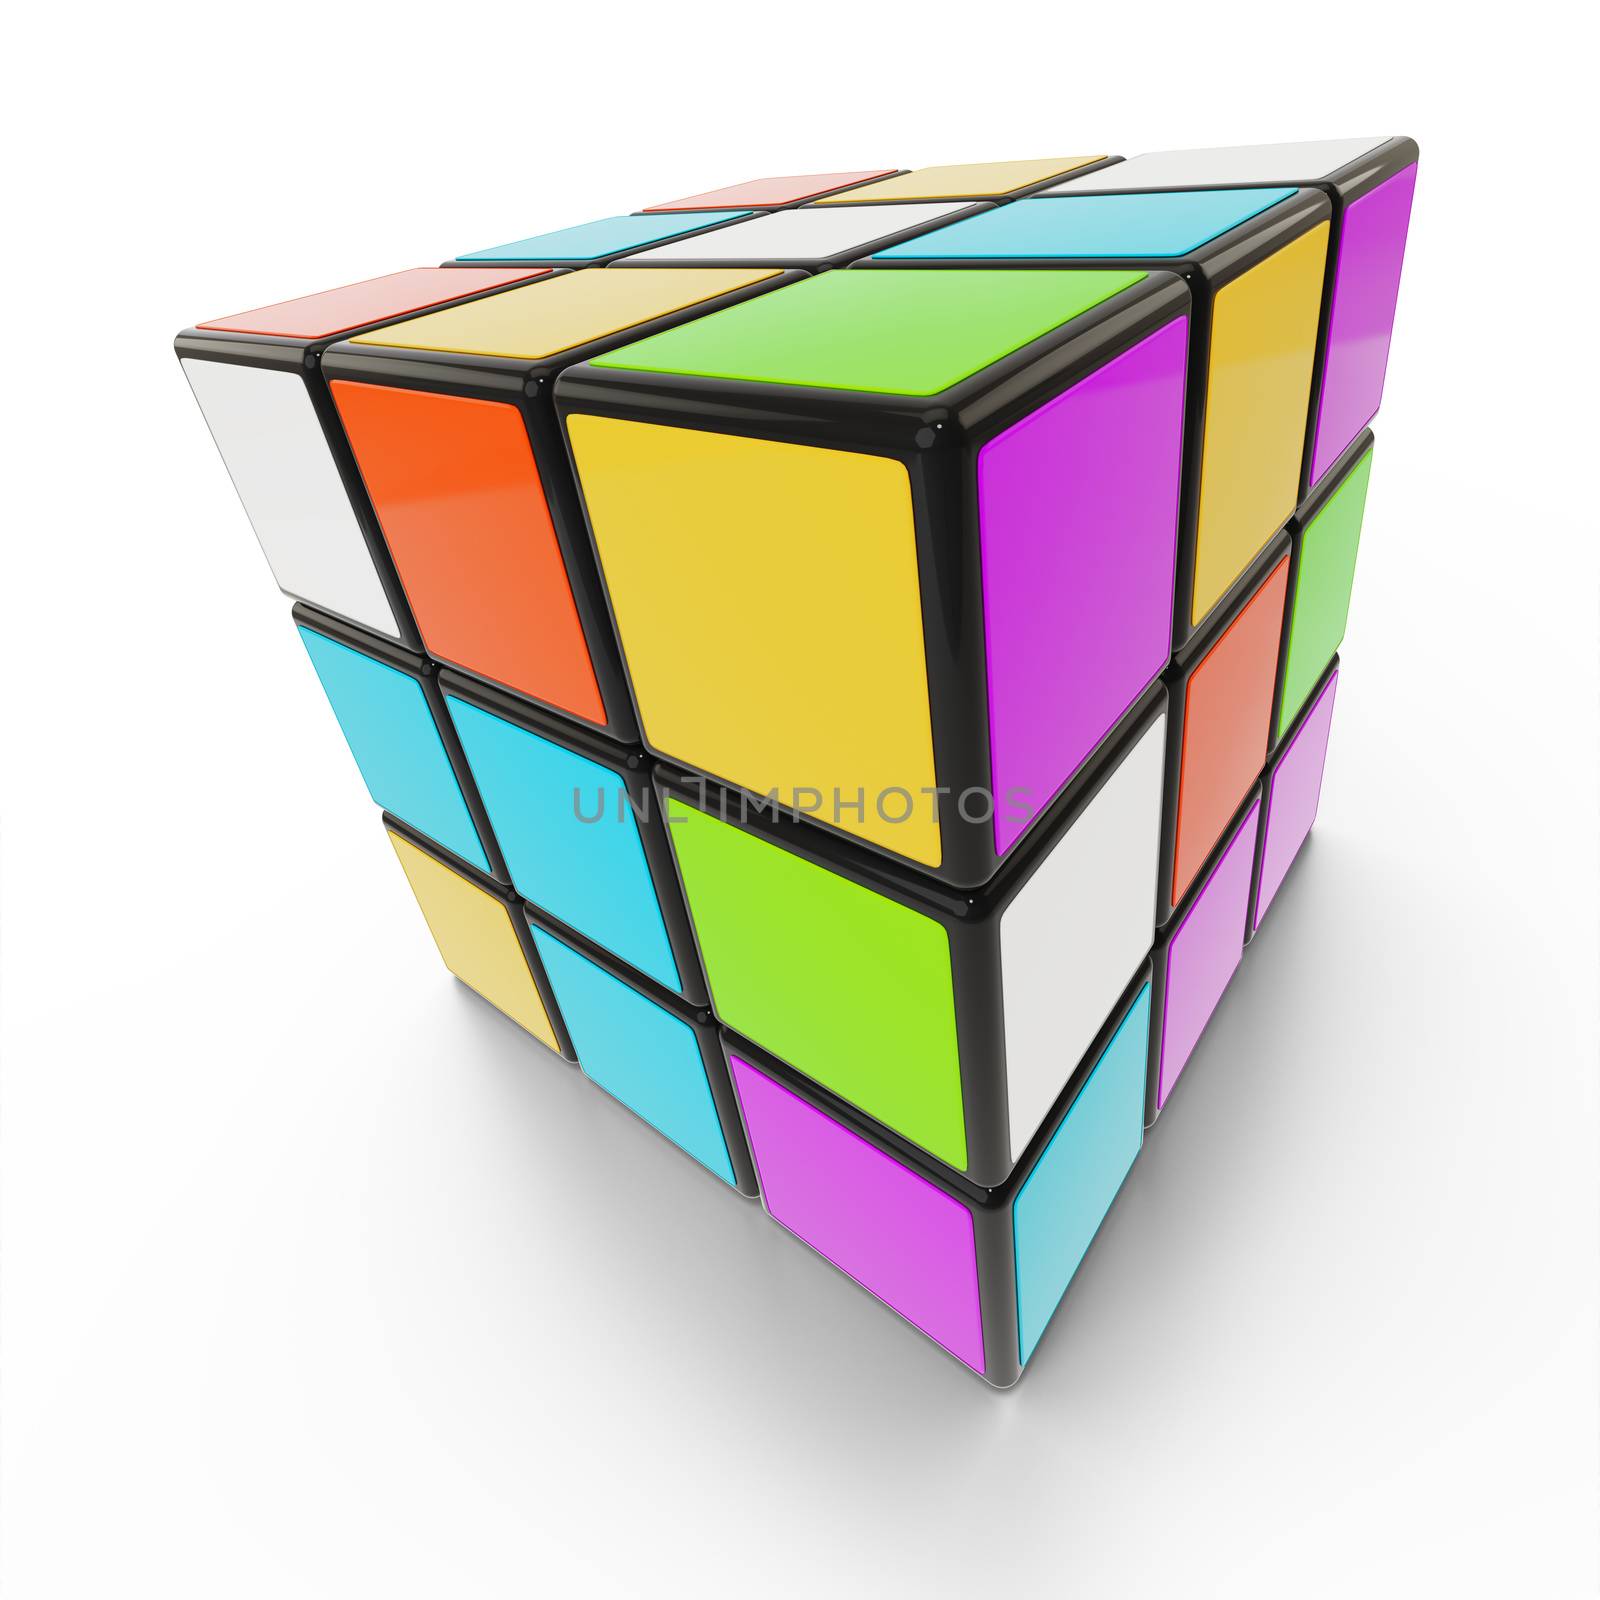 Sindelfingen, Germany, July 4th 2019. Editorial 3D illustration. Rubik's Cube is a 3D combination puzzle invented in 1974 by Hungarian Erno Rubik.